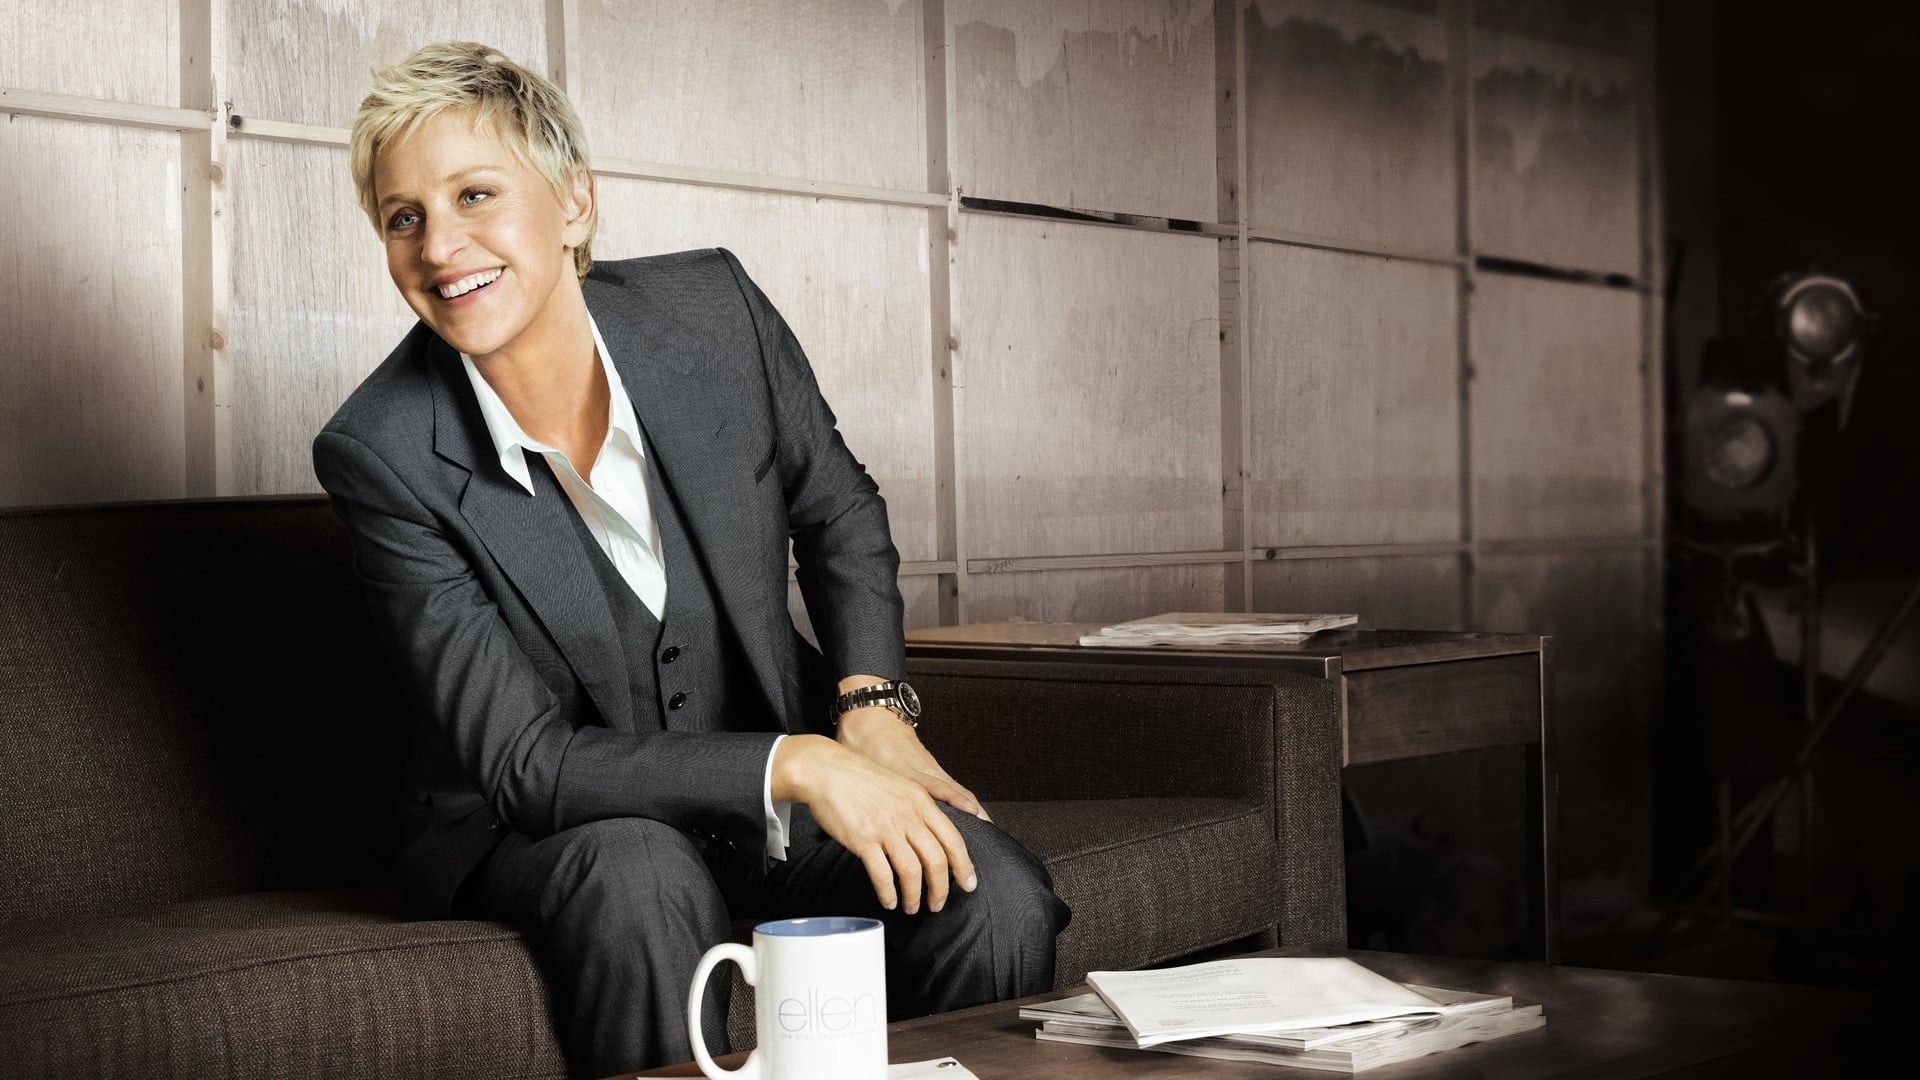 Ellen DeGeneres: A well-known television personality, particularly in the category of stand-up comedians. 1920x1080 Full HD Wallpaper.